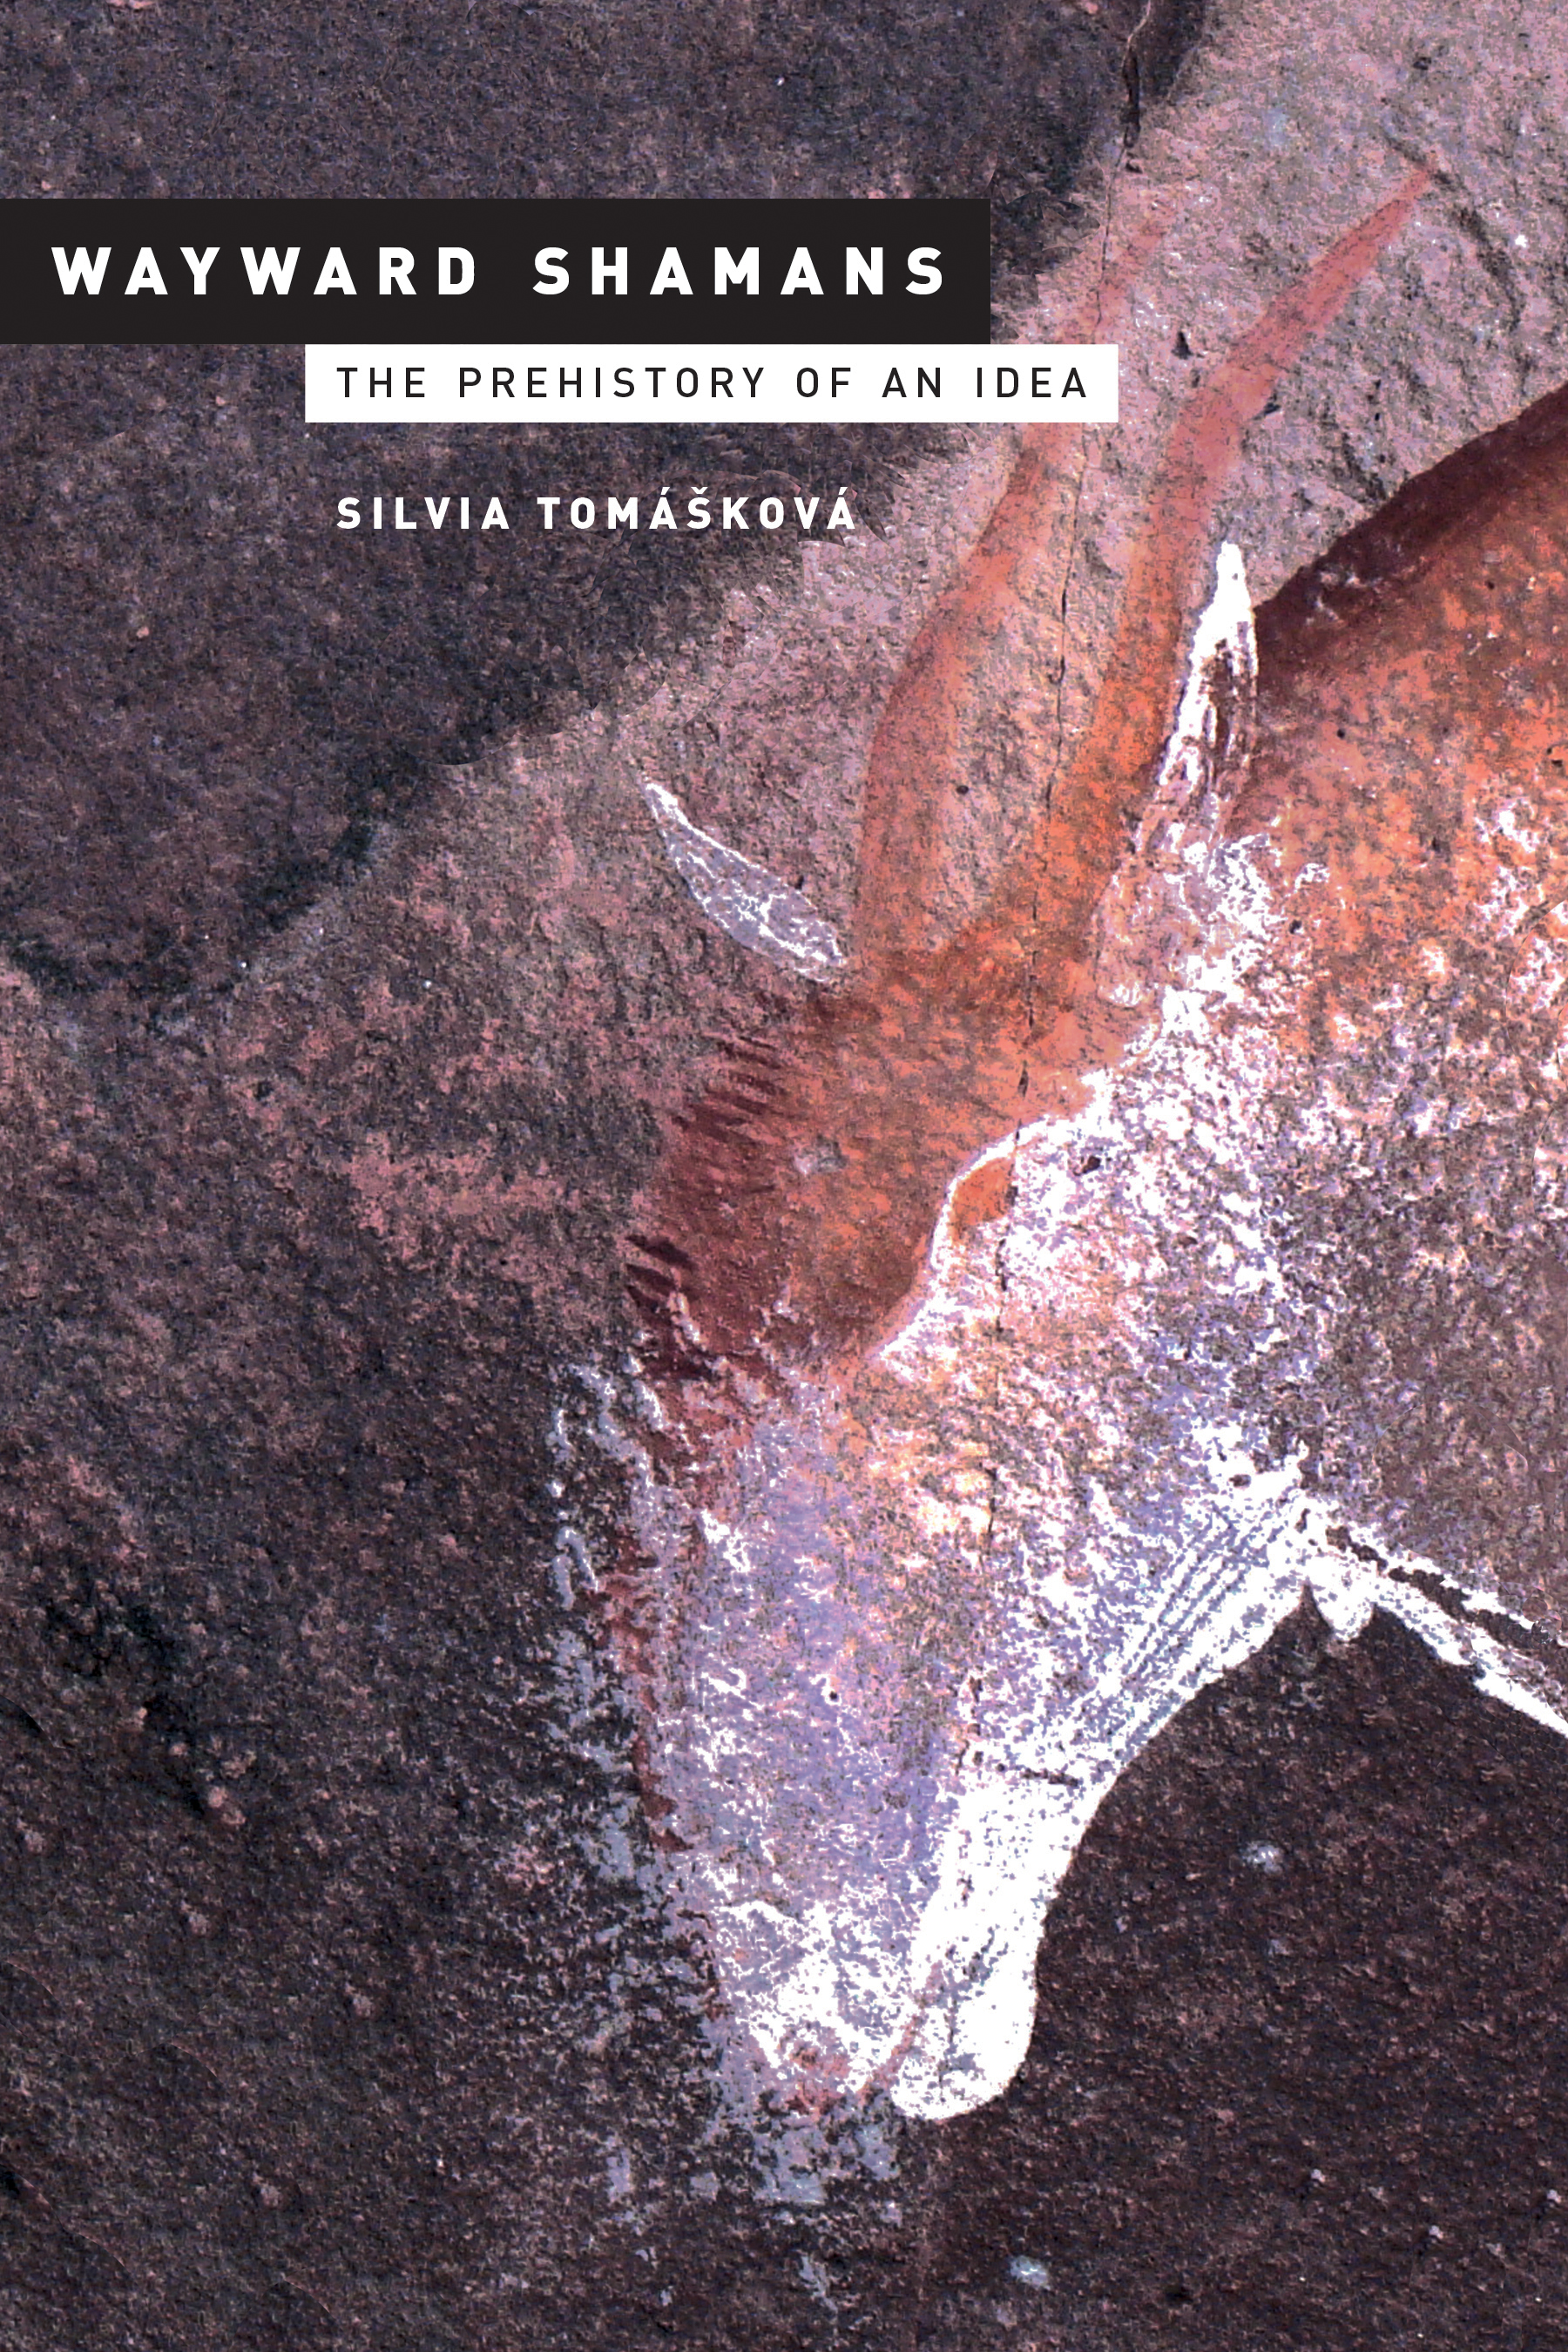 Tomaskova's book challenges the notion that the rock art drawings were down by shamans under hallucinogenic trance.